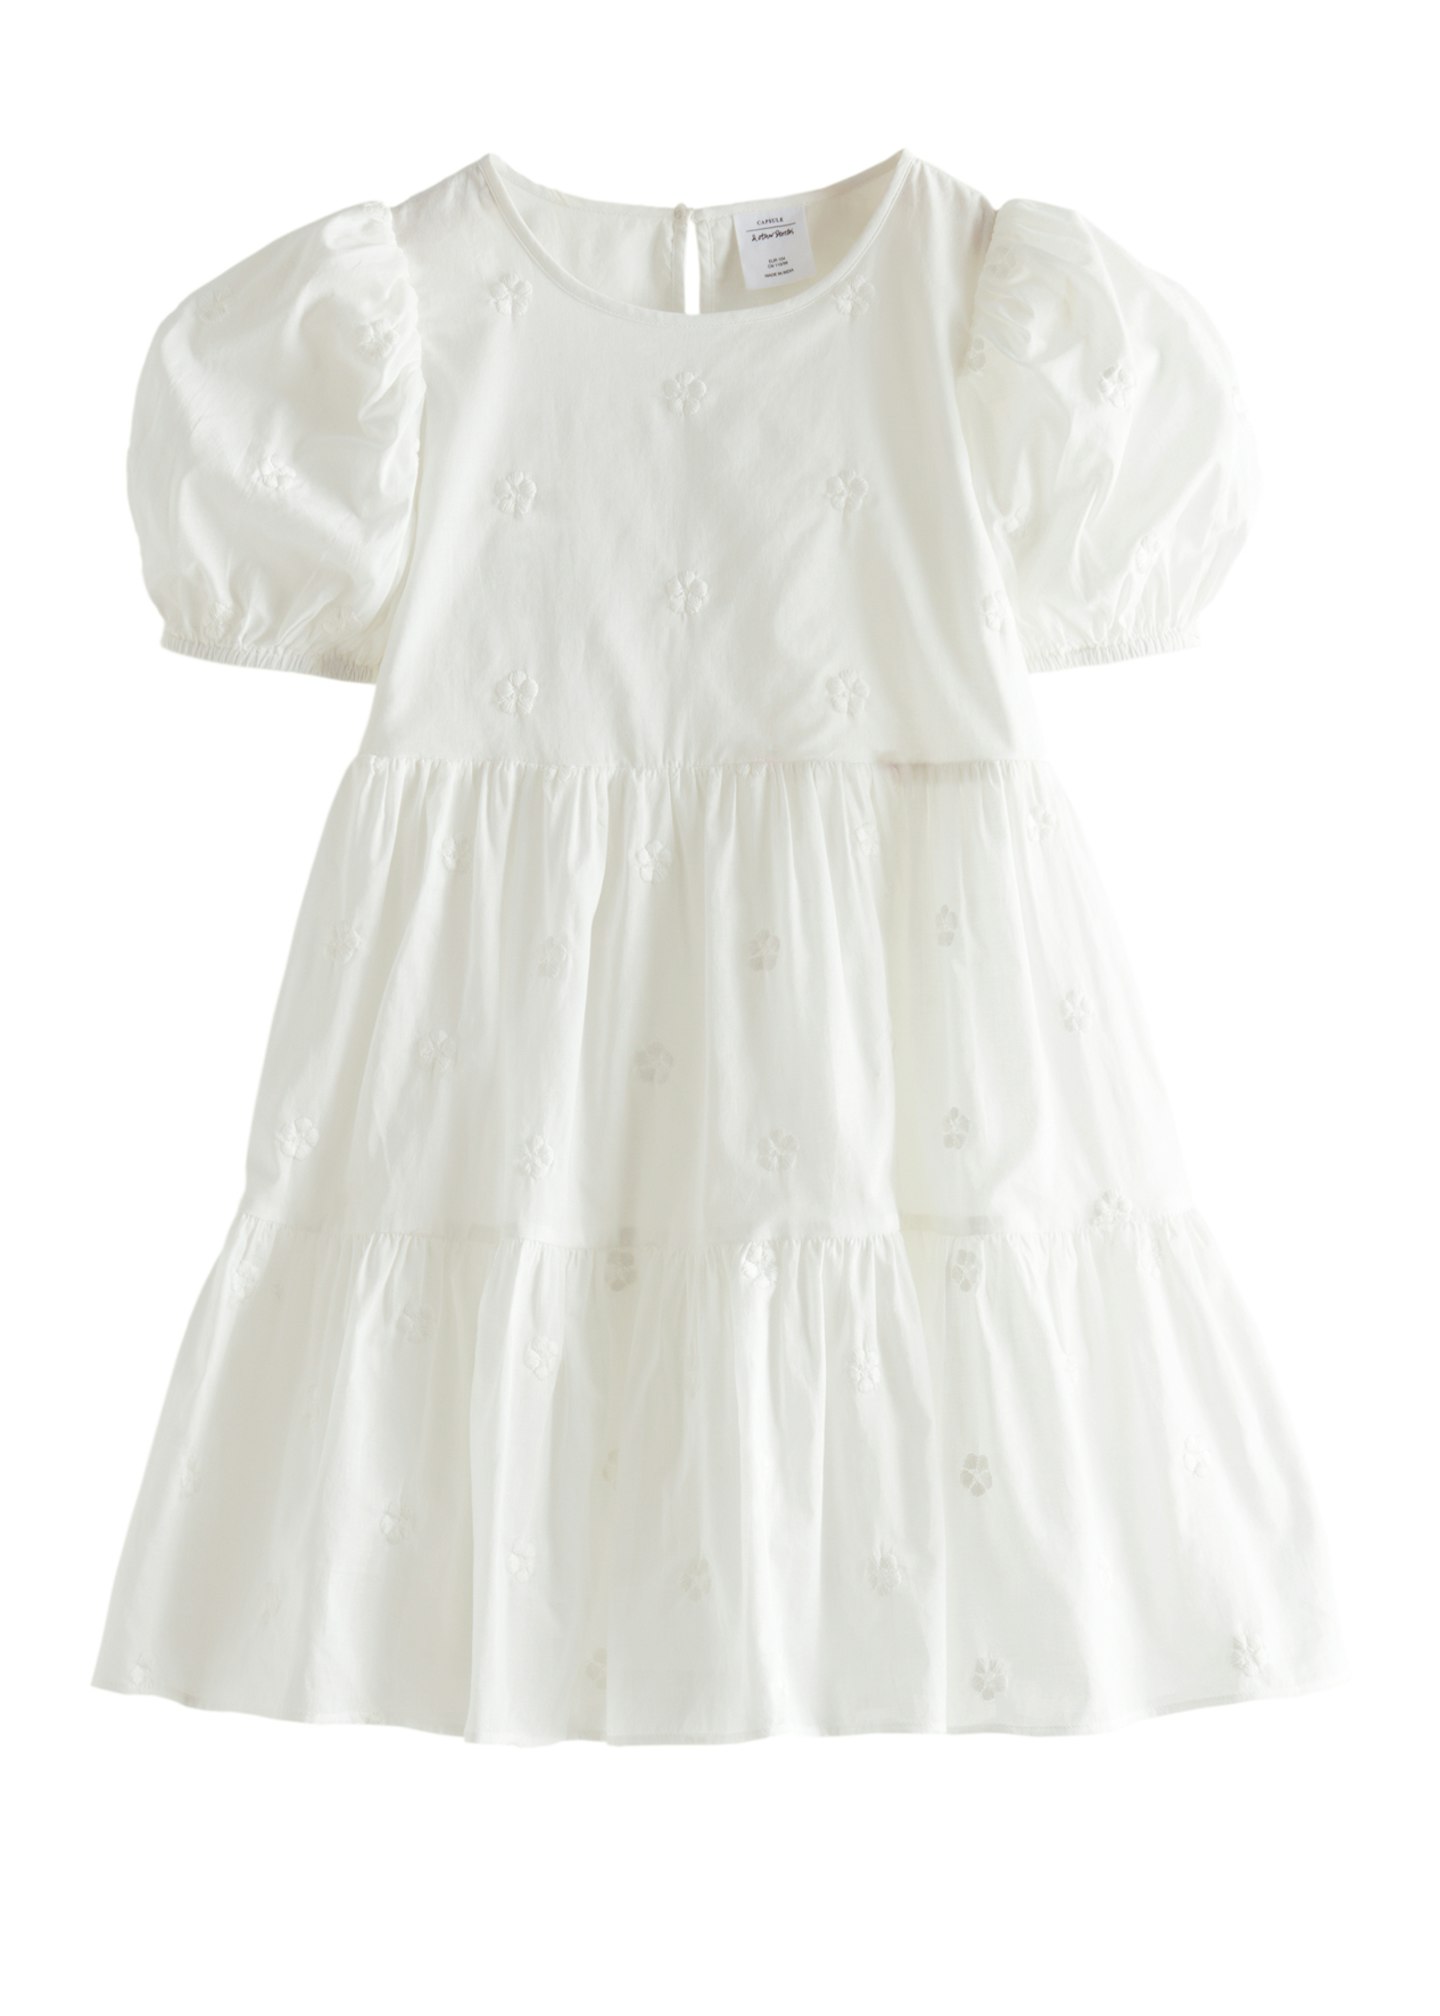 & Other Stories, Tiered Puff-Sleeve Dress, £45